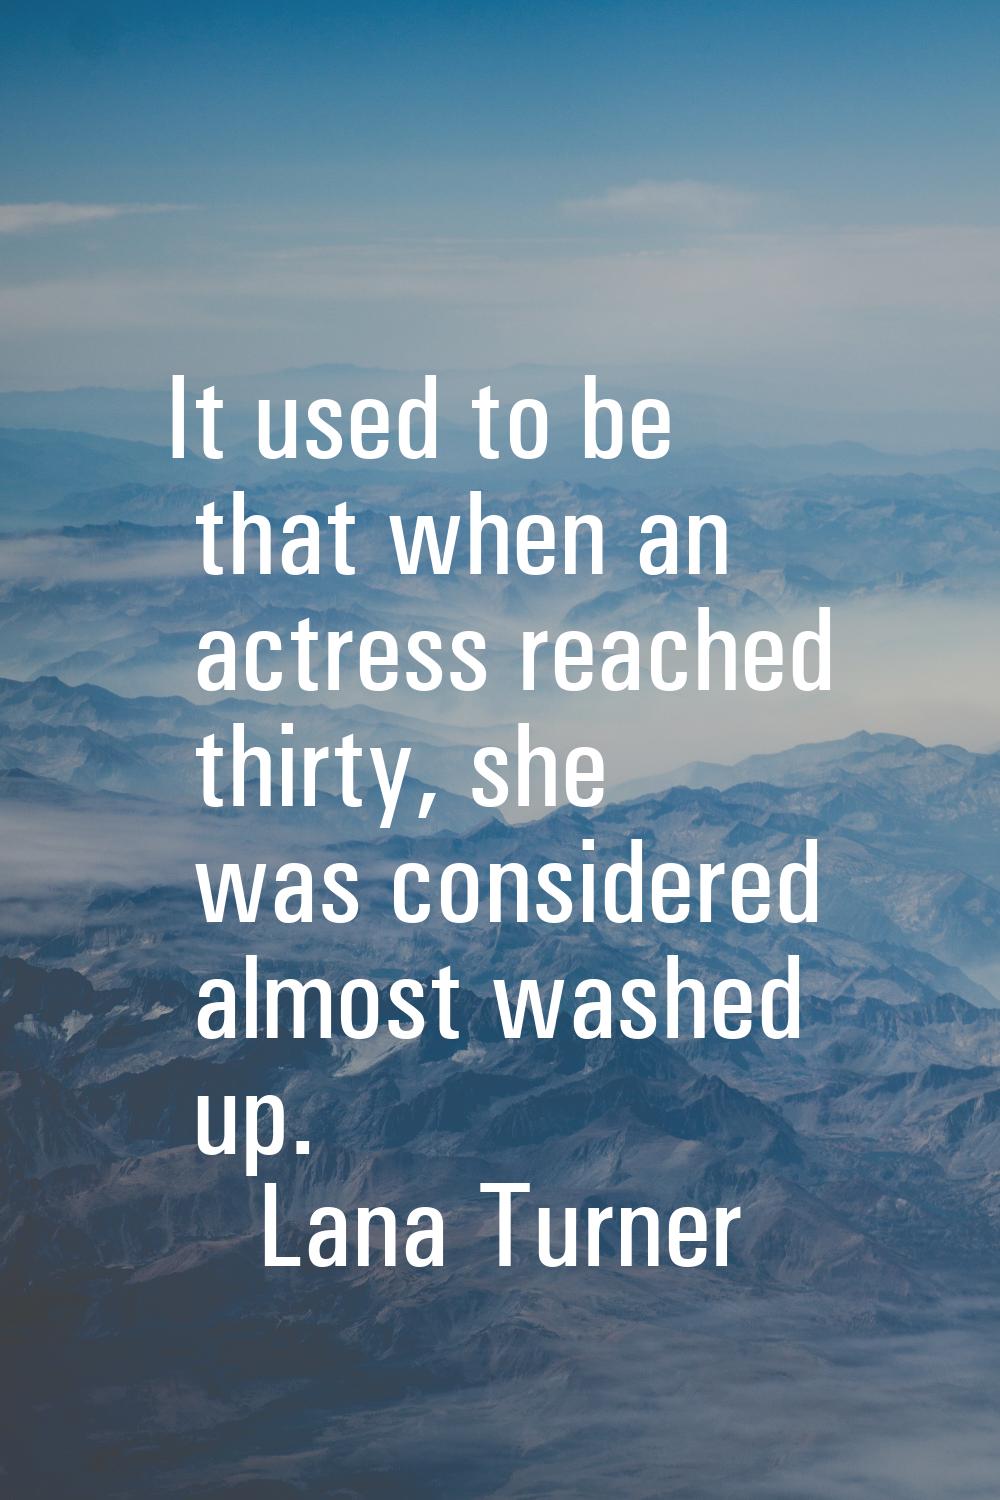 It used to be that when an actress reached thirty, she was considered almost washed up.